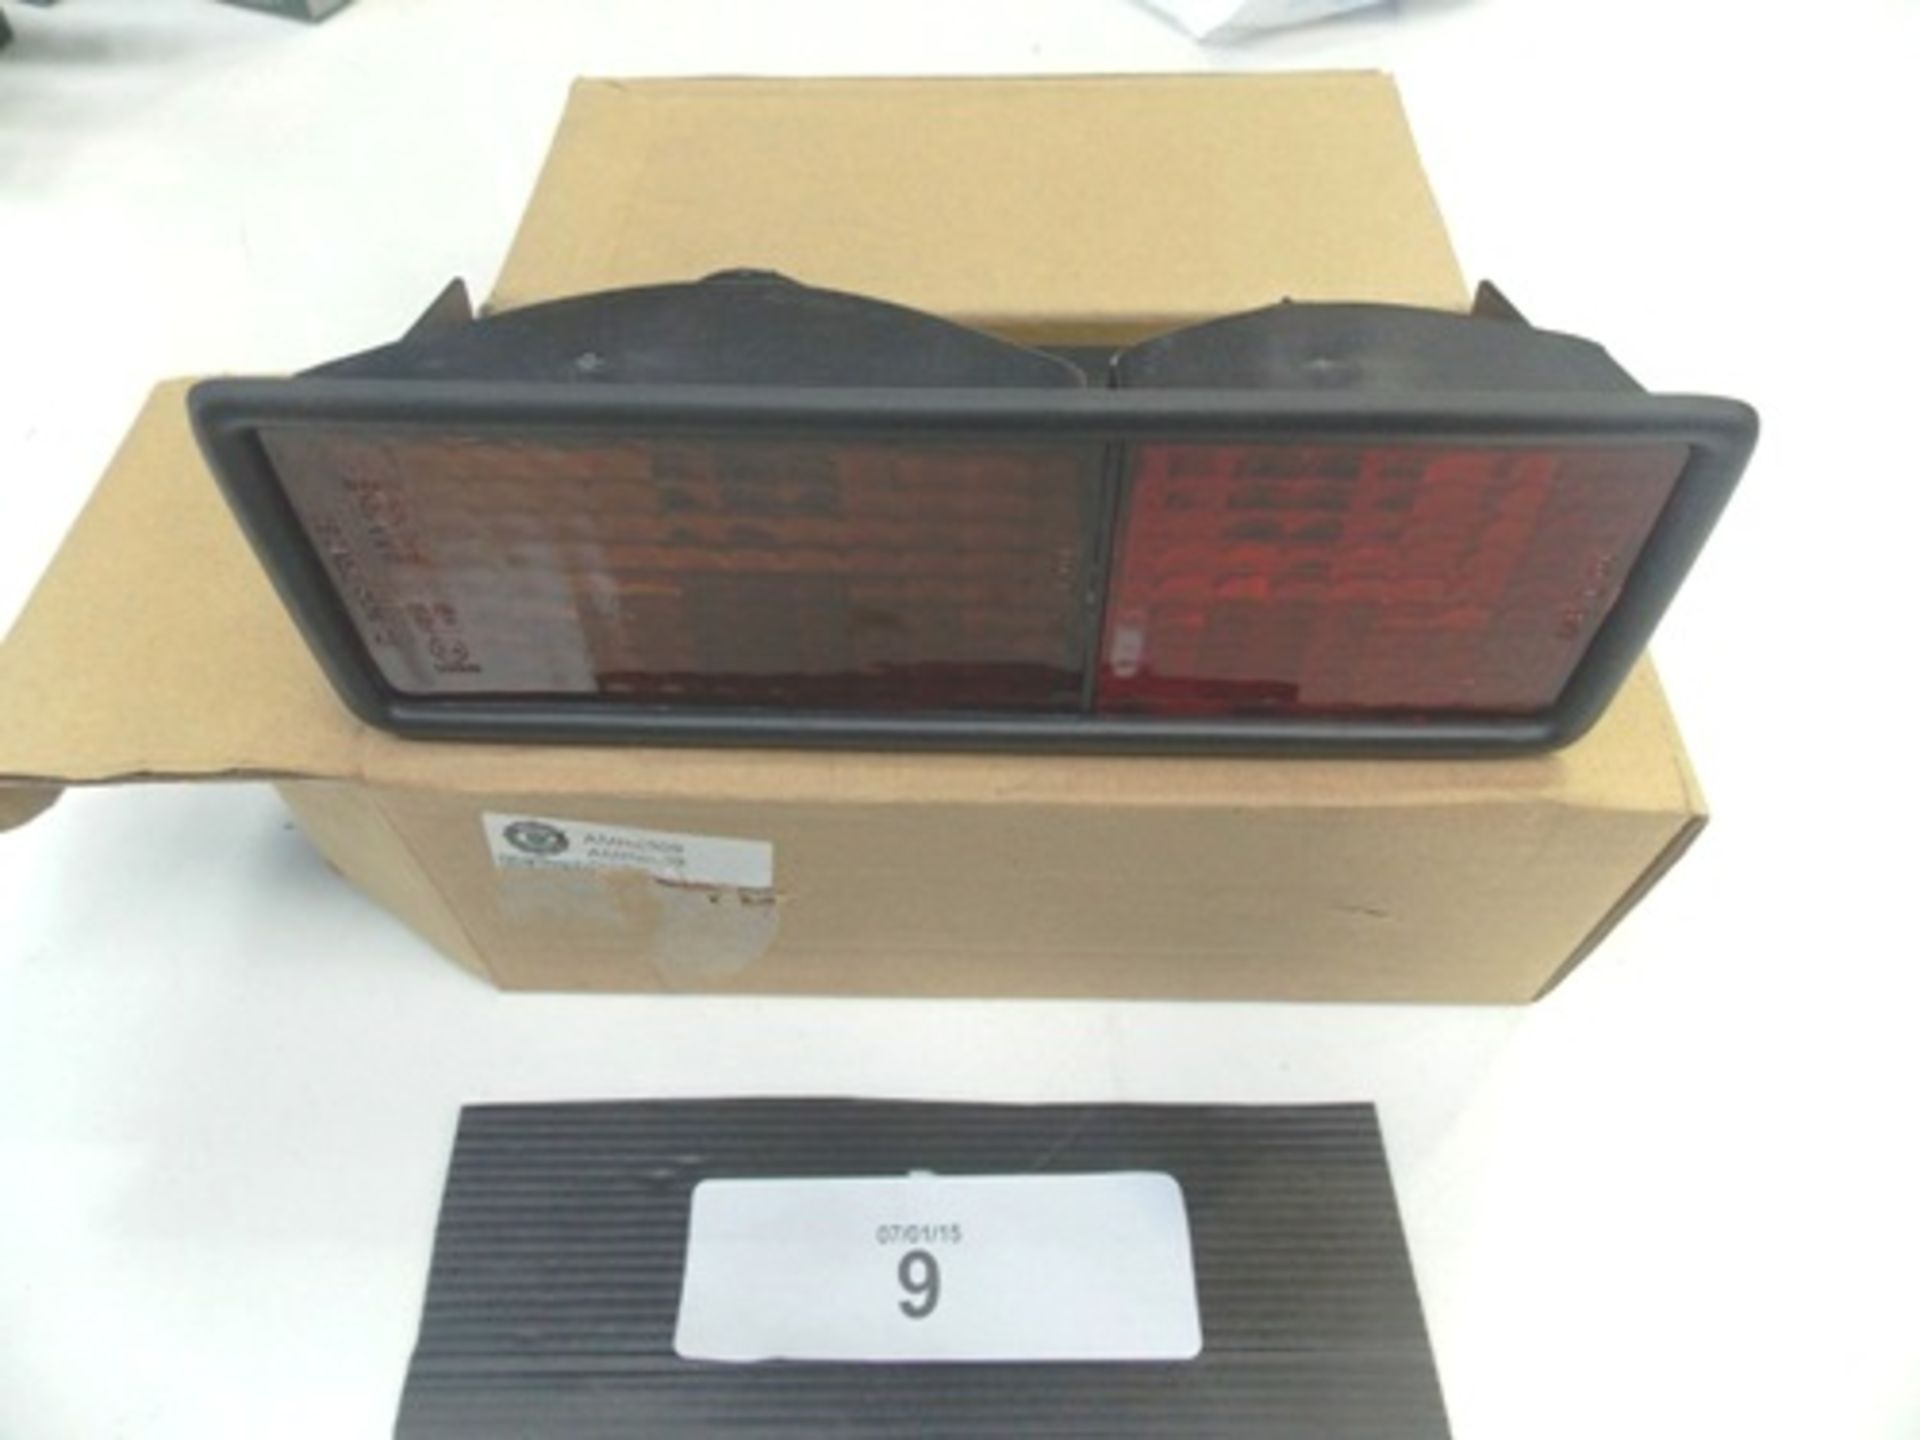 2 x Land Rover rear light units, P.N. AMR6510 & AMR6509, total RRP £120.00 - New in box